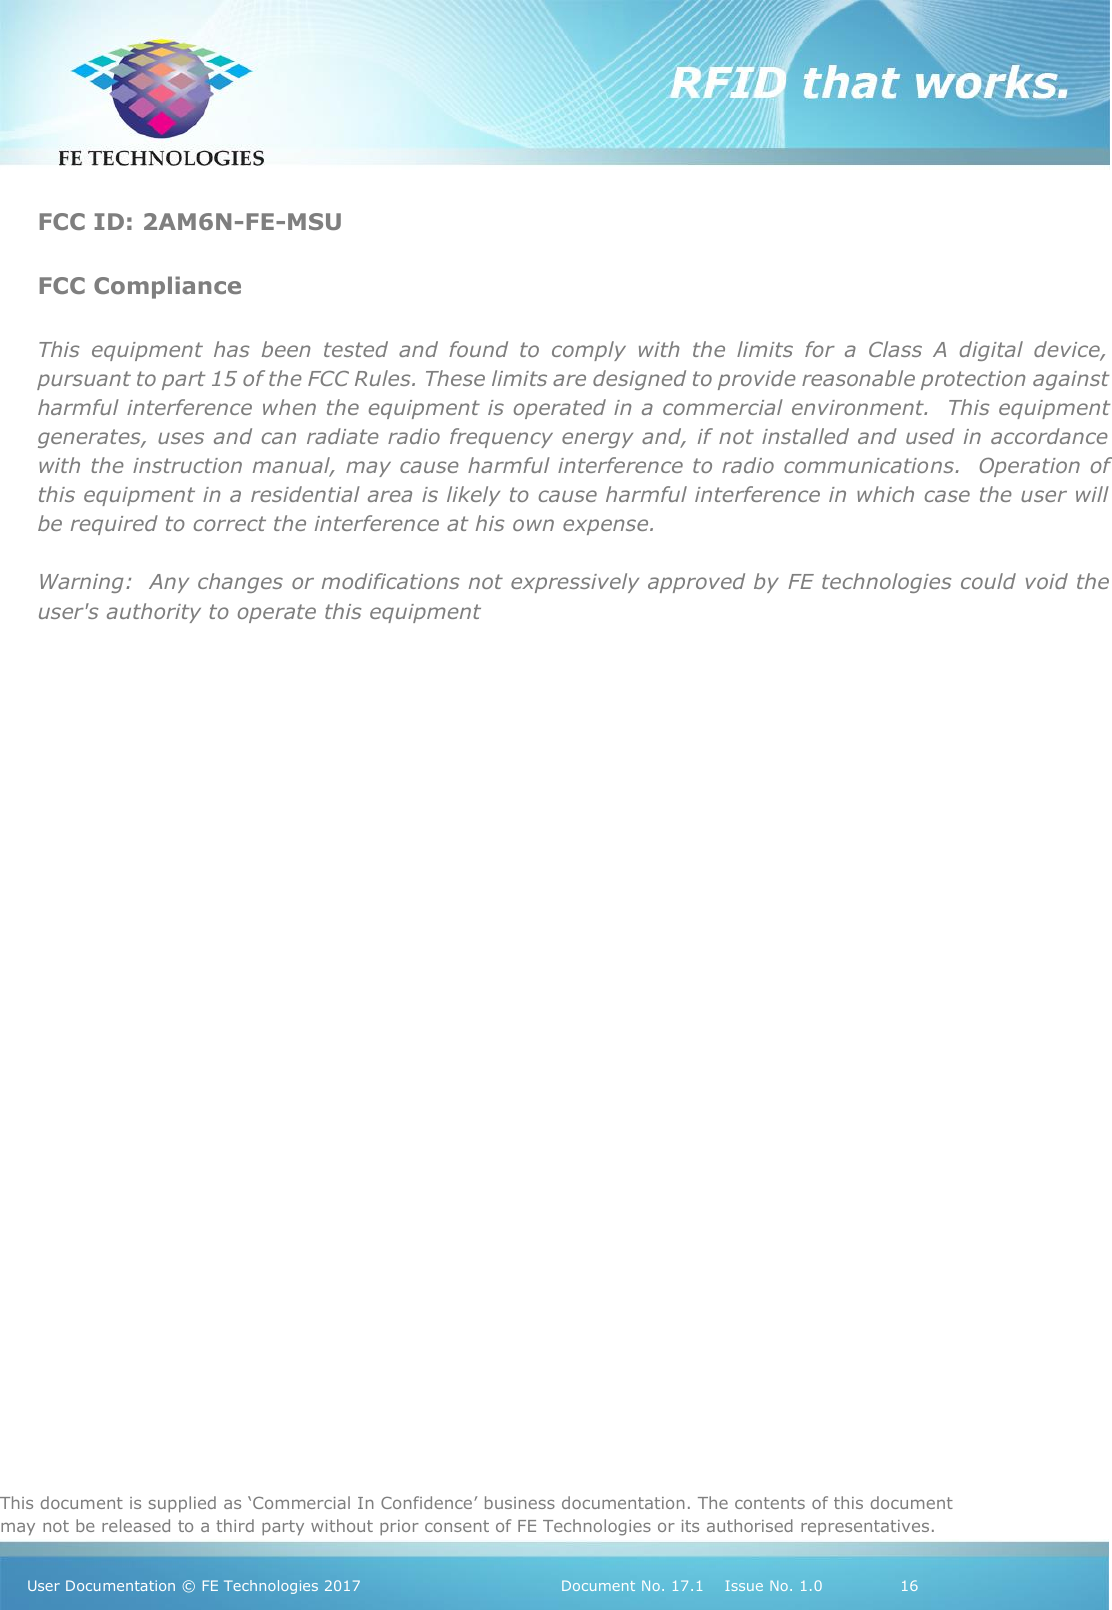   This document is supplied as ‘Commercial In Confidence’ business documentation. The contents of this document may not be released to a third party without prior consent of FE Technologies or its authorised representatives.  User Documentation © FE Technologies 2017                                 Document No. 17.1    Issue No. 1.0               16   FCC ID: 2AM6N-FE-MSU  FCC Compliance  This  equipment  has  been  tested  and  found  to  comply  with  the  limits  for  a  Class  A  digital  device, pursuant to part 15 of the FCC Rules. These limits are designed to provide reasonable protection against harmful interference when the equipment is operated in a commercial environment.  This equipment generates, uses and can radiate radio frequency energy and, if not installed and used in accordance with the instruction manual, may cause harmful interference to radio communications.  Operation of this equipment in a residential area is likely to cause harmful interference in which case the user will be required to correct the interference at his own expense.  Warning:  Any changes or modifications not expressively approved by FE technologies could void the user&apos;s authority to operate this equipment    